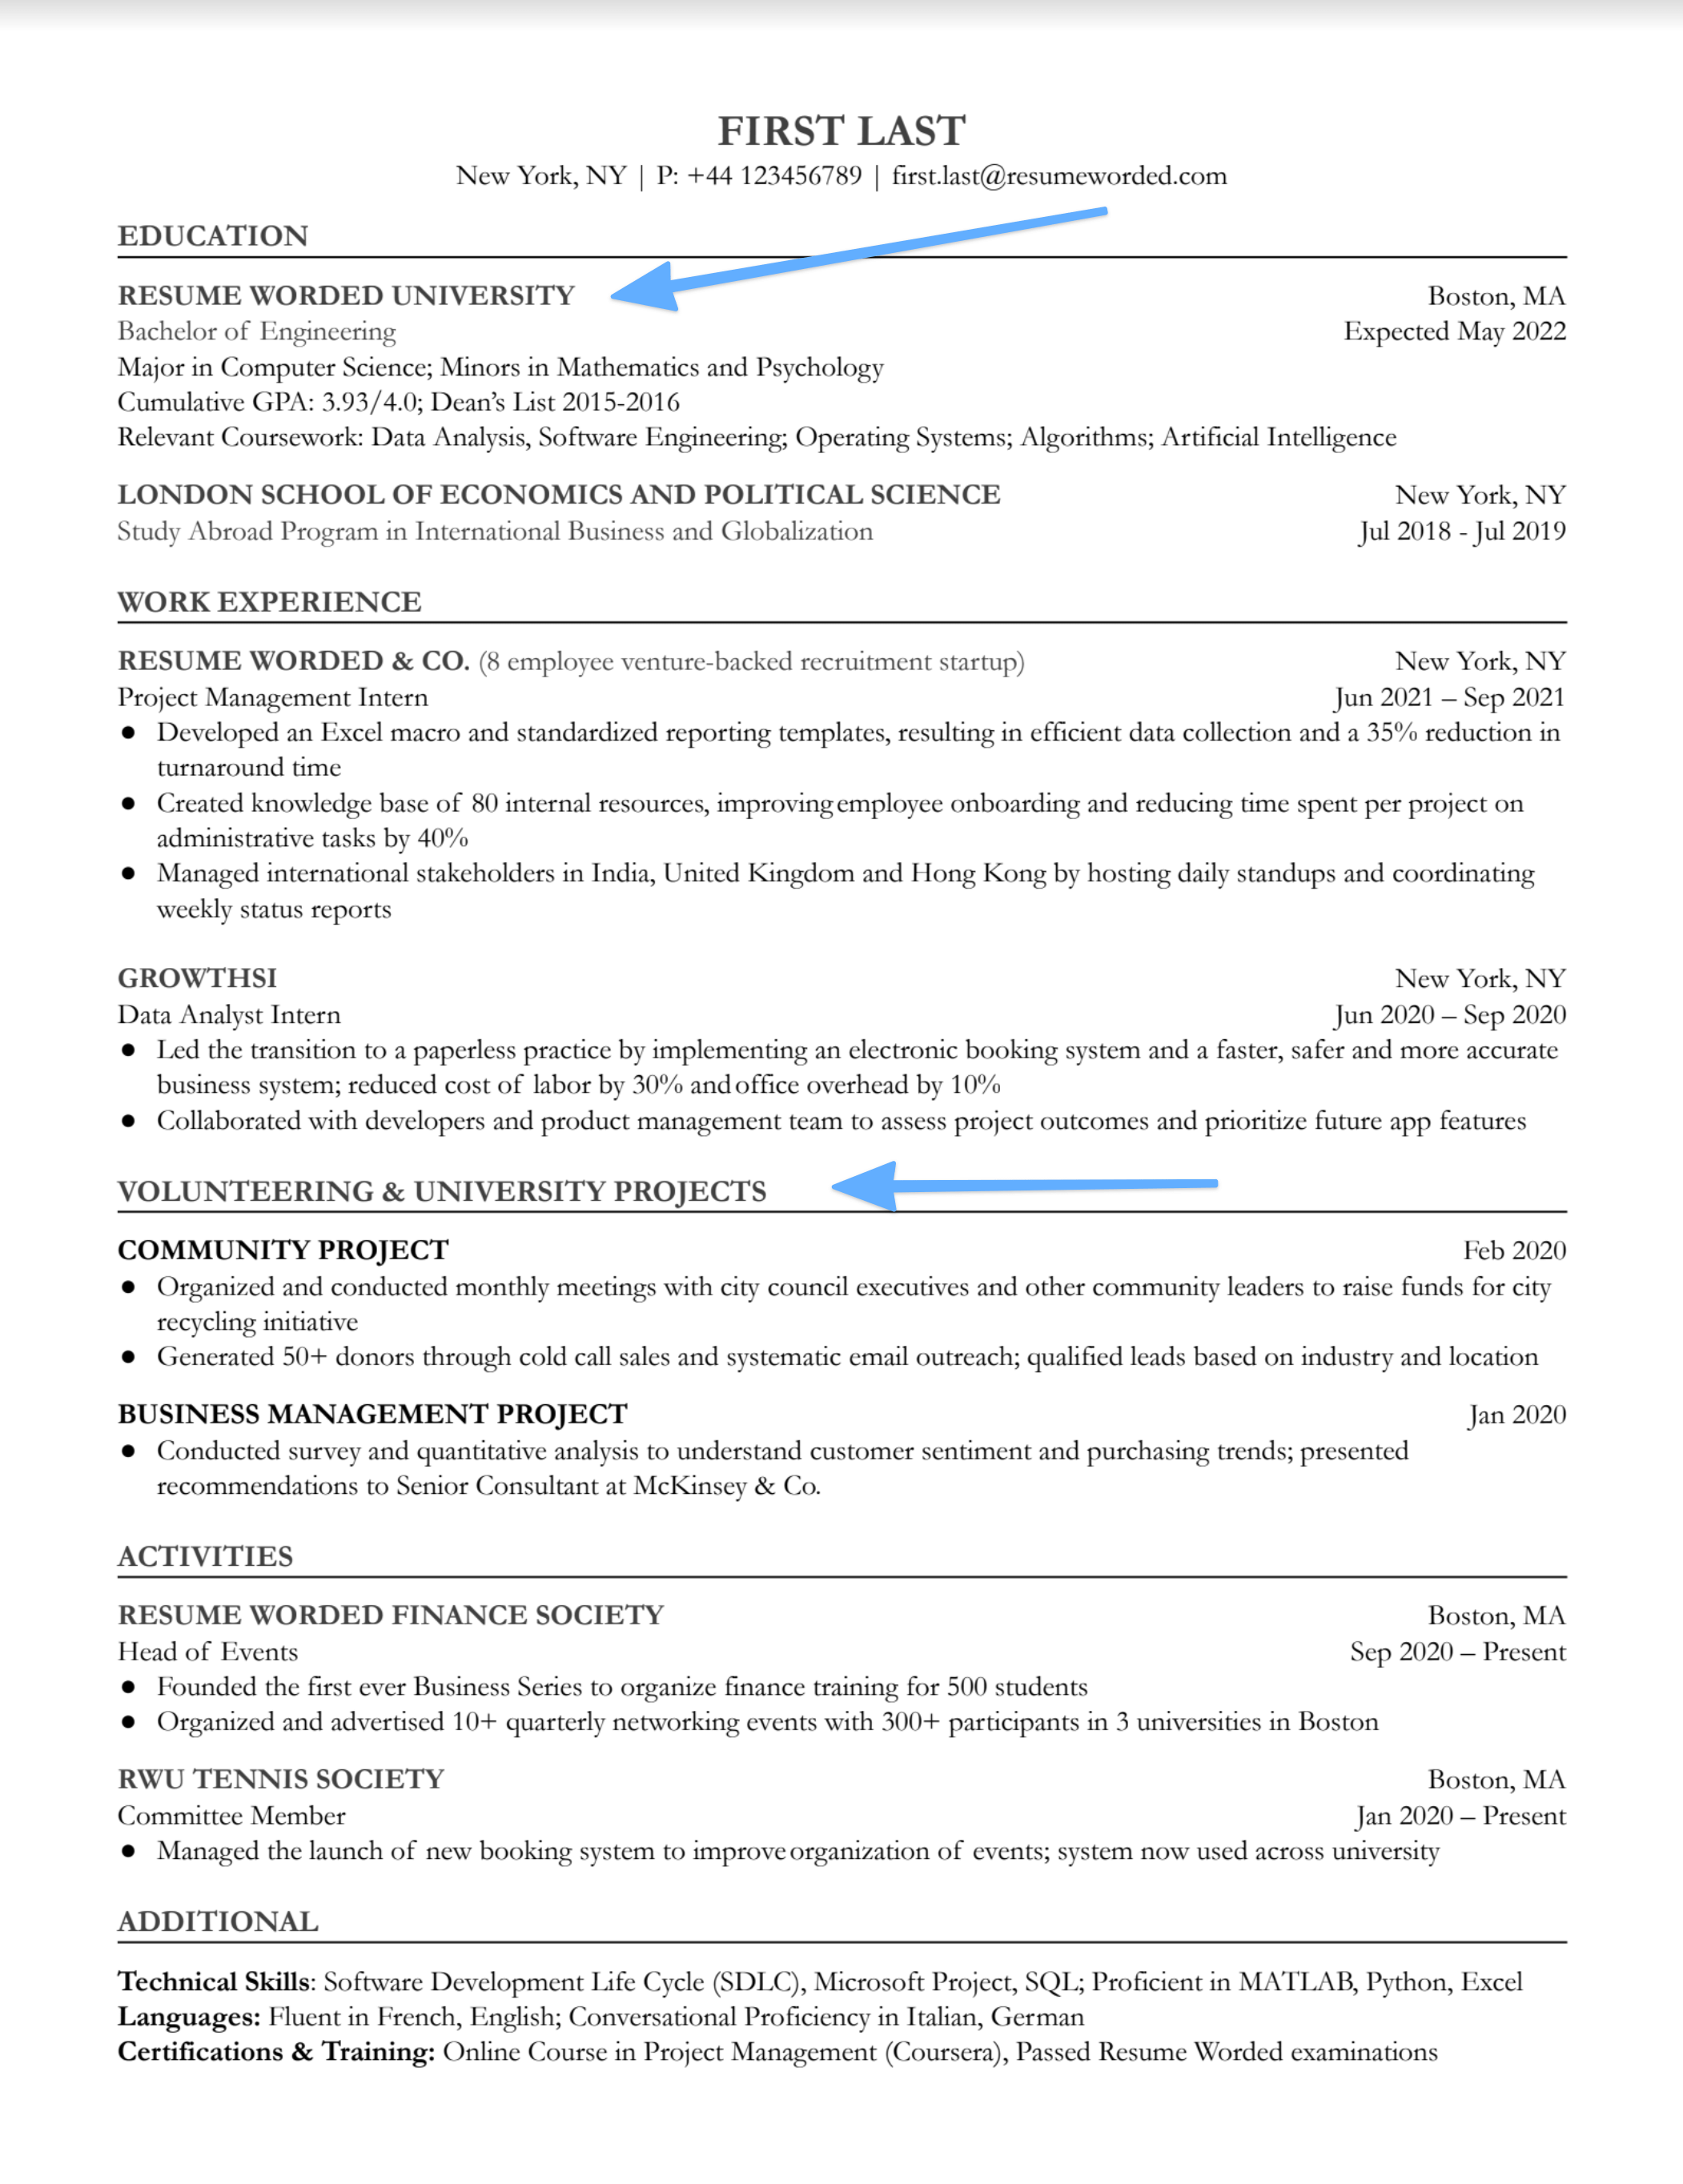 A well-structured CV showcasing transferable skills and digital tool familiarity for an entry-level project manager position.